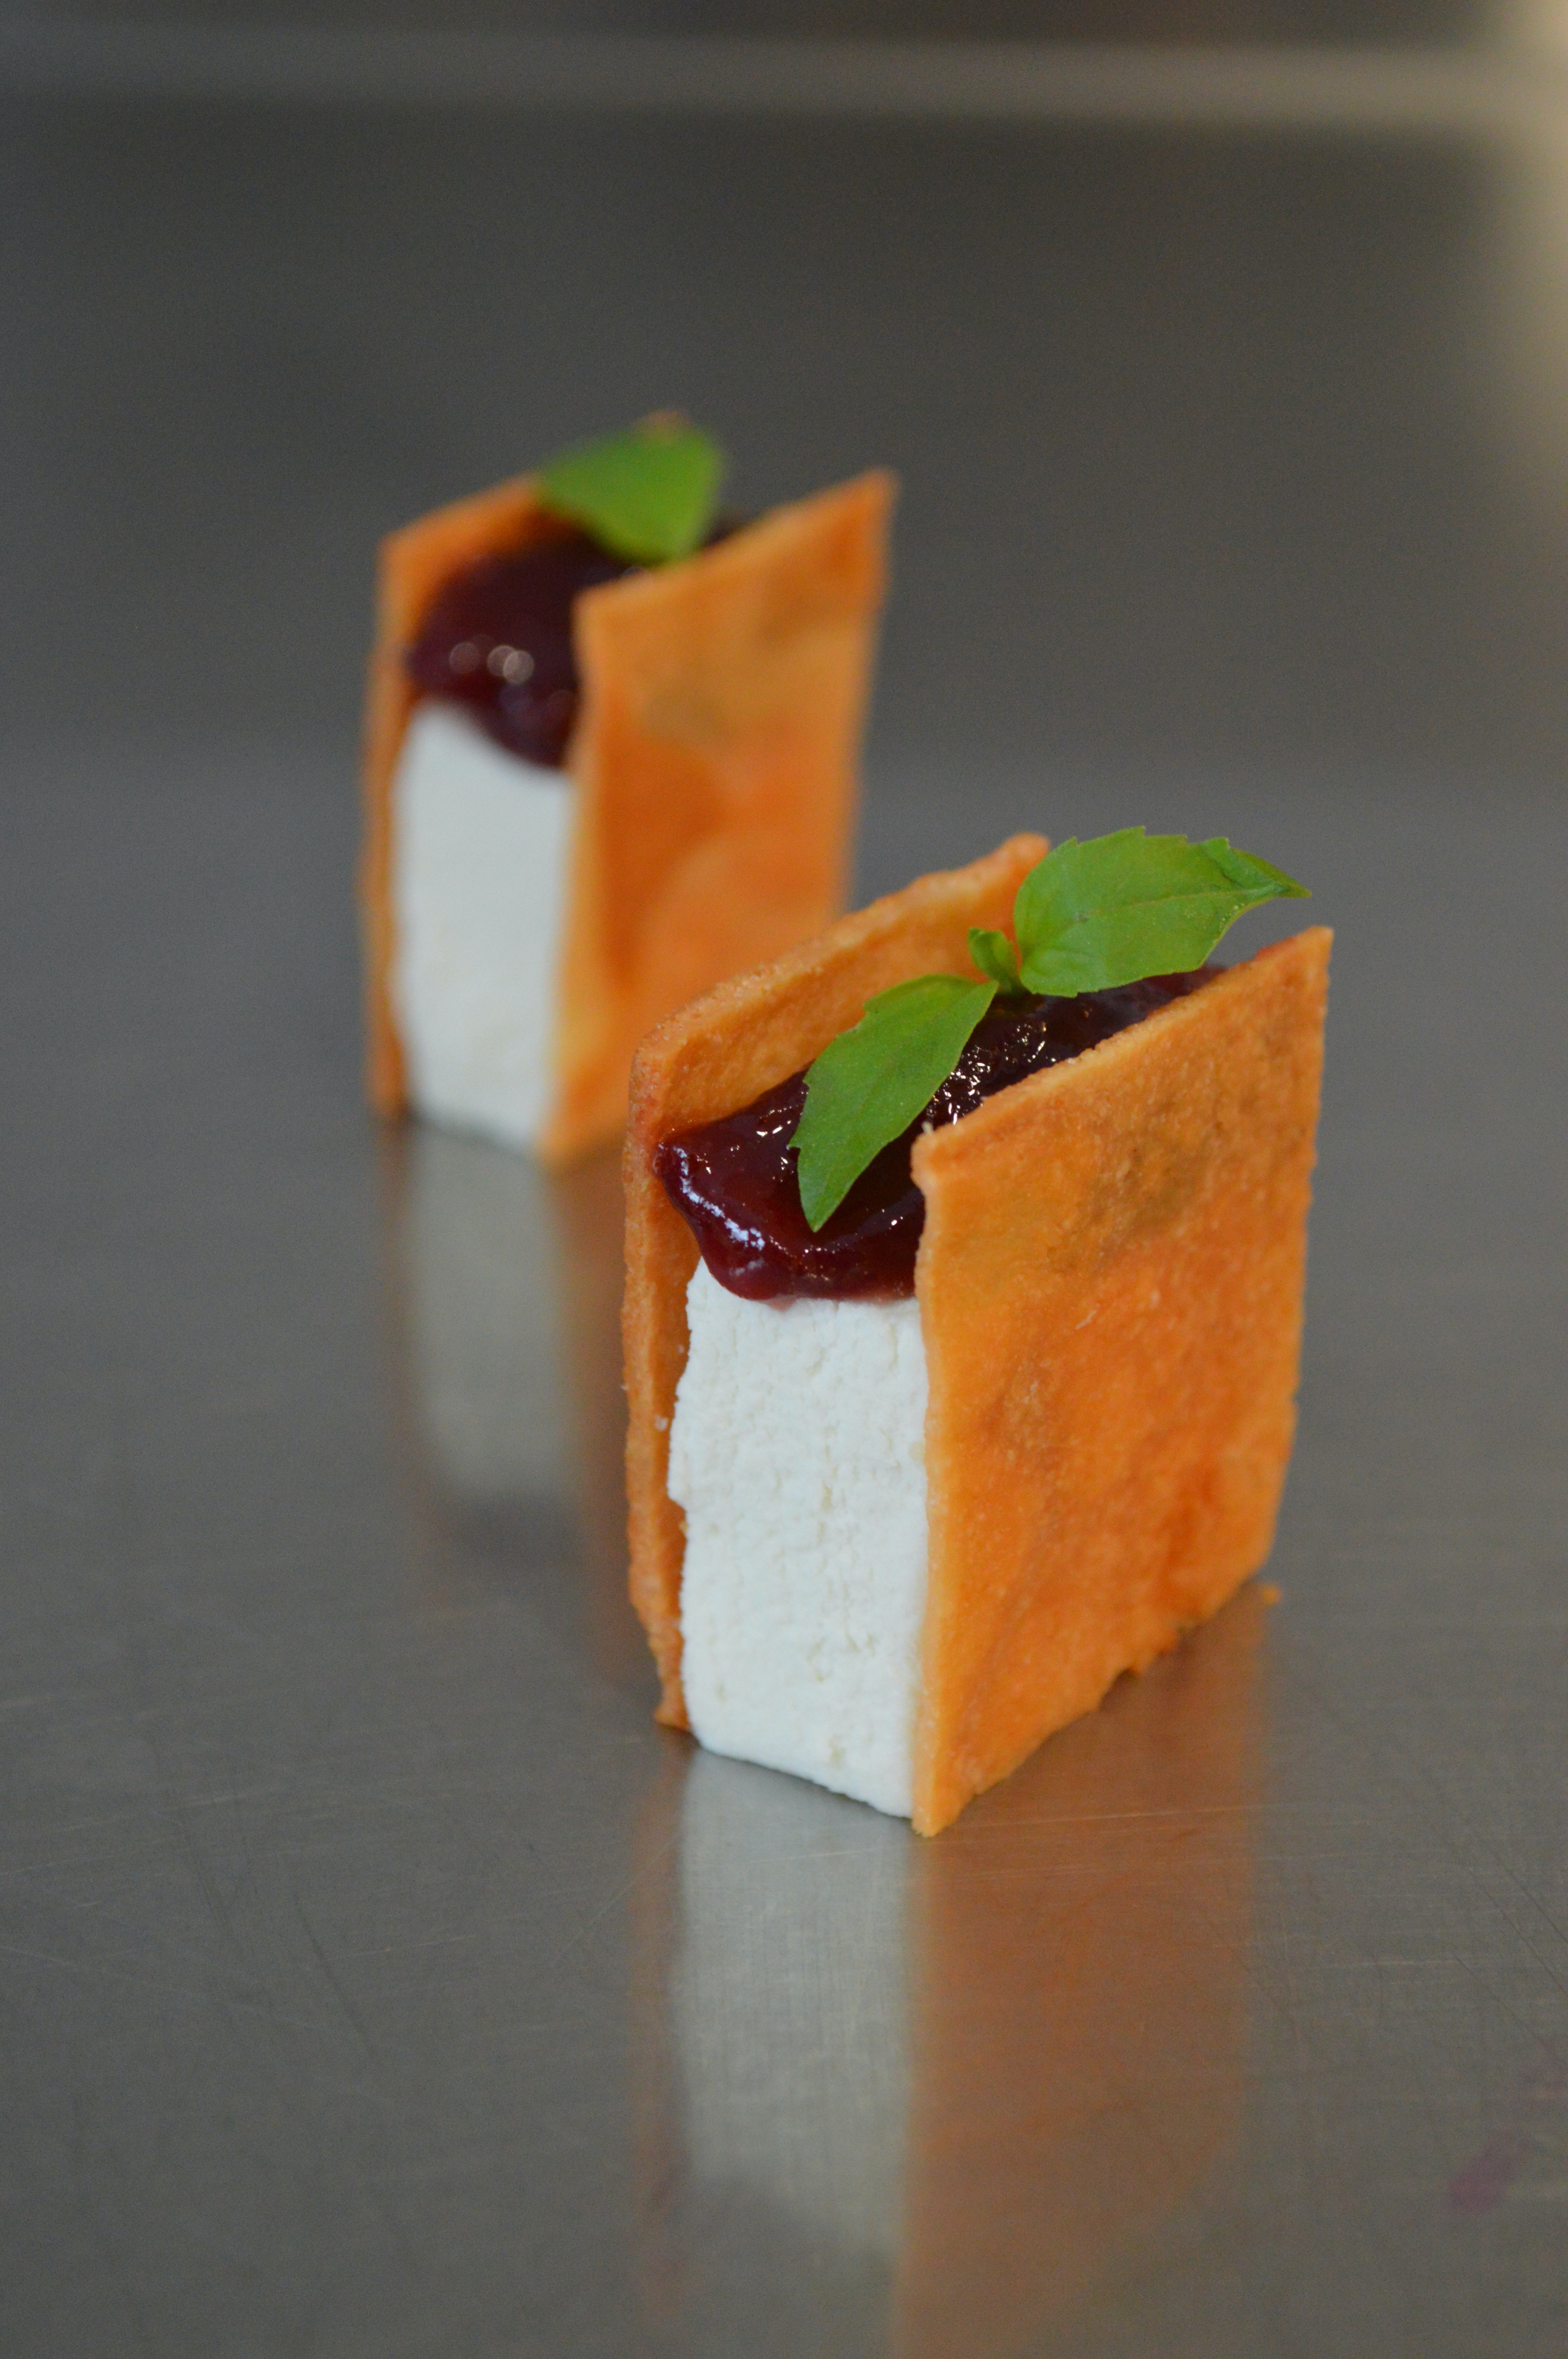 A small galette of fromage blanc, plum jam, and basil, served as an hors d'oeuvre.